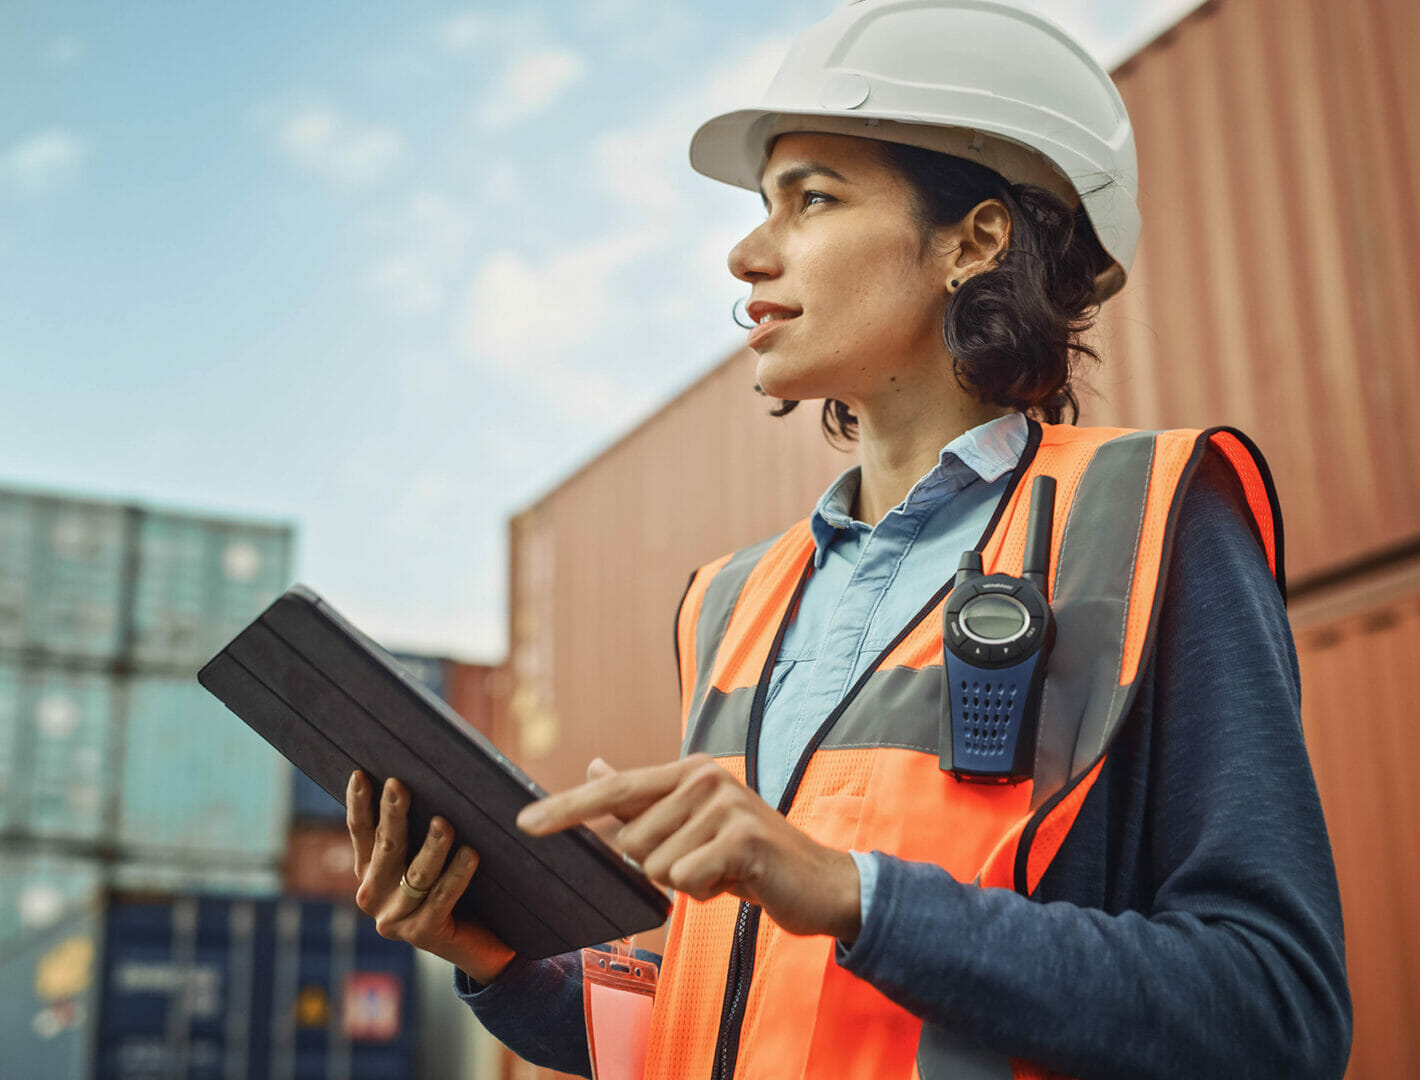 Construction worker with tablet in hand